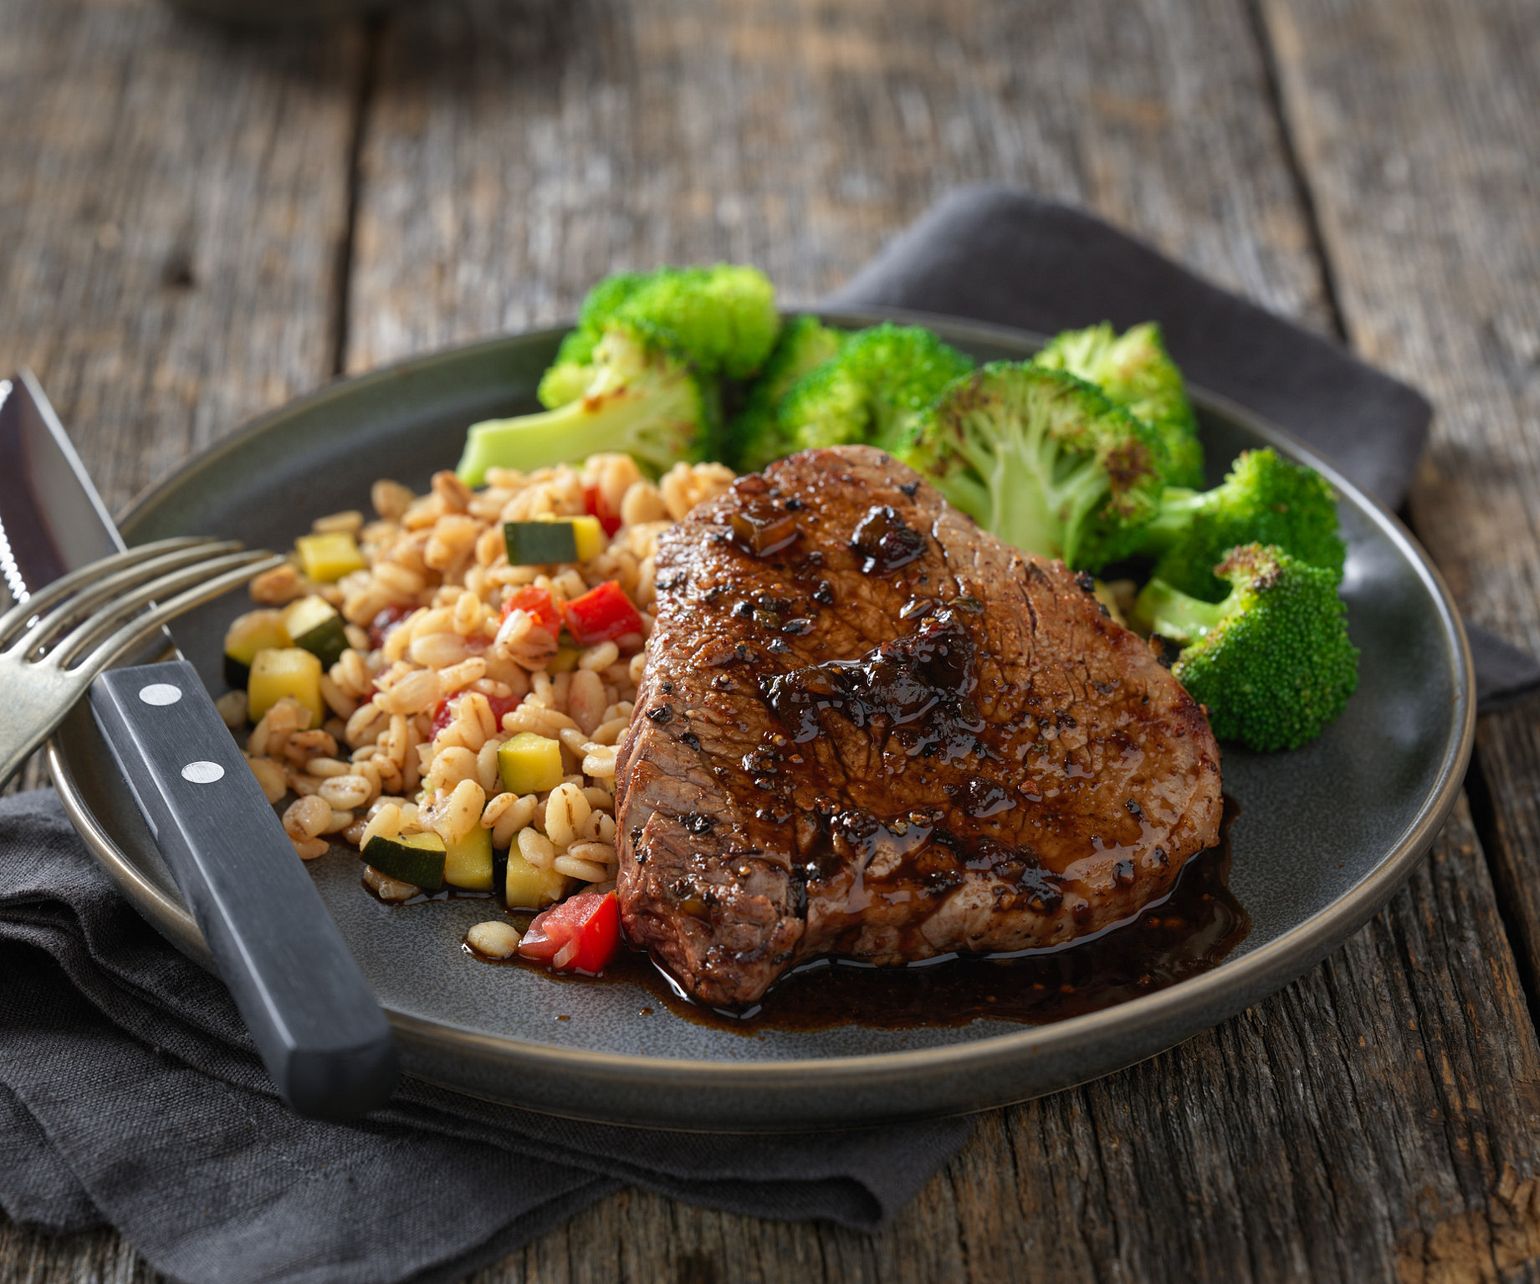 Sweet & Spicy Petite Sirloin Steaks with Vegetable Barley Risotto